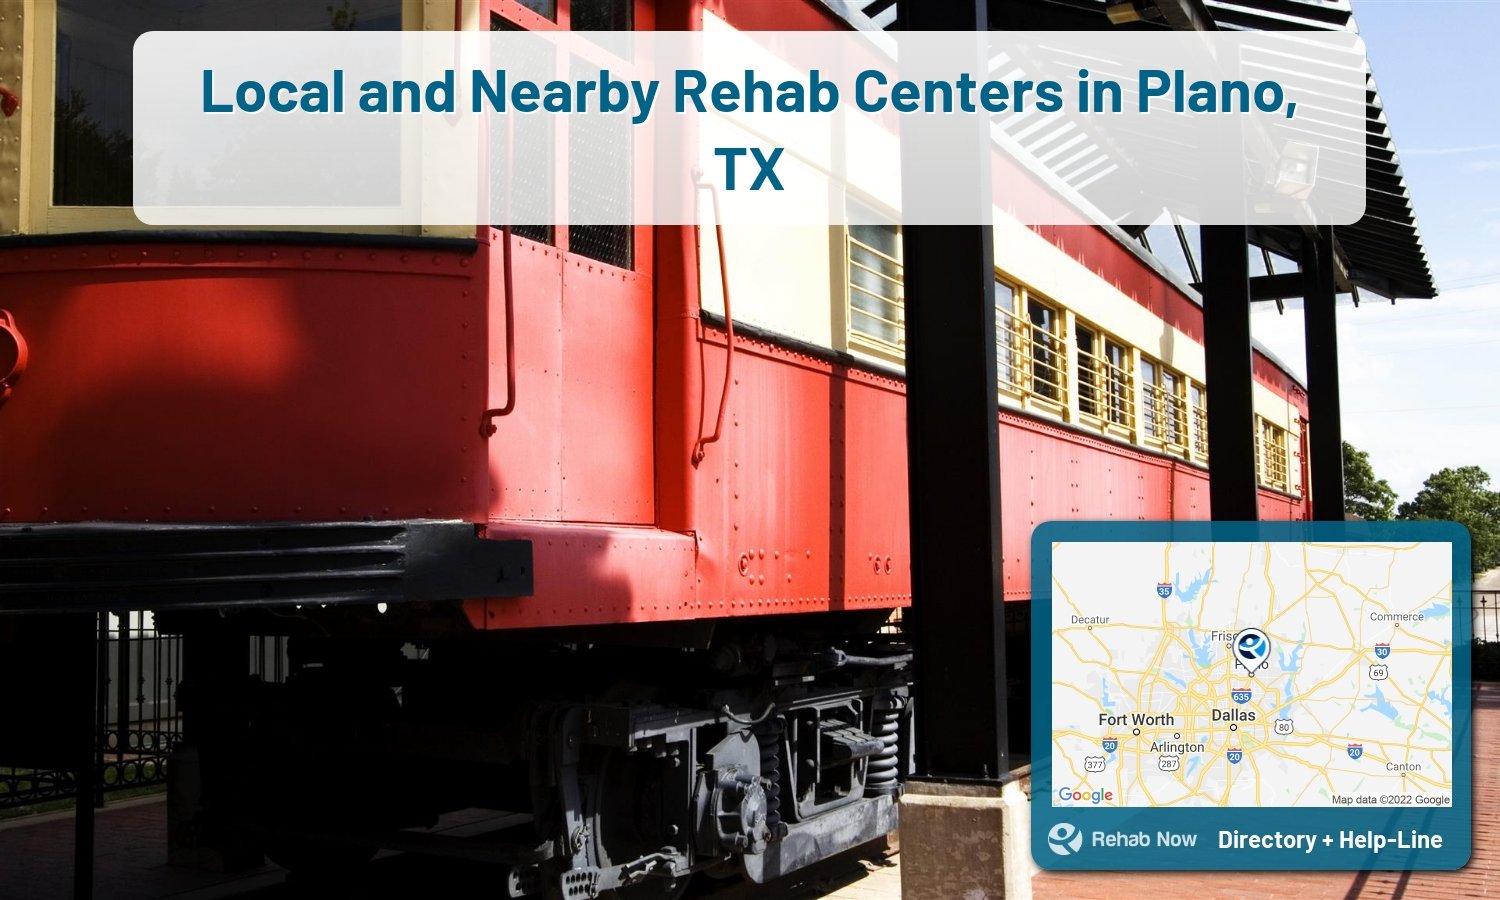 Plano, TX Treatment Centers. Find drug rehab in Plano, Texas, or detox and treatment programs. Get the right help now!